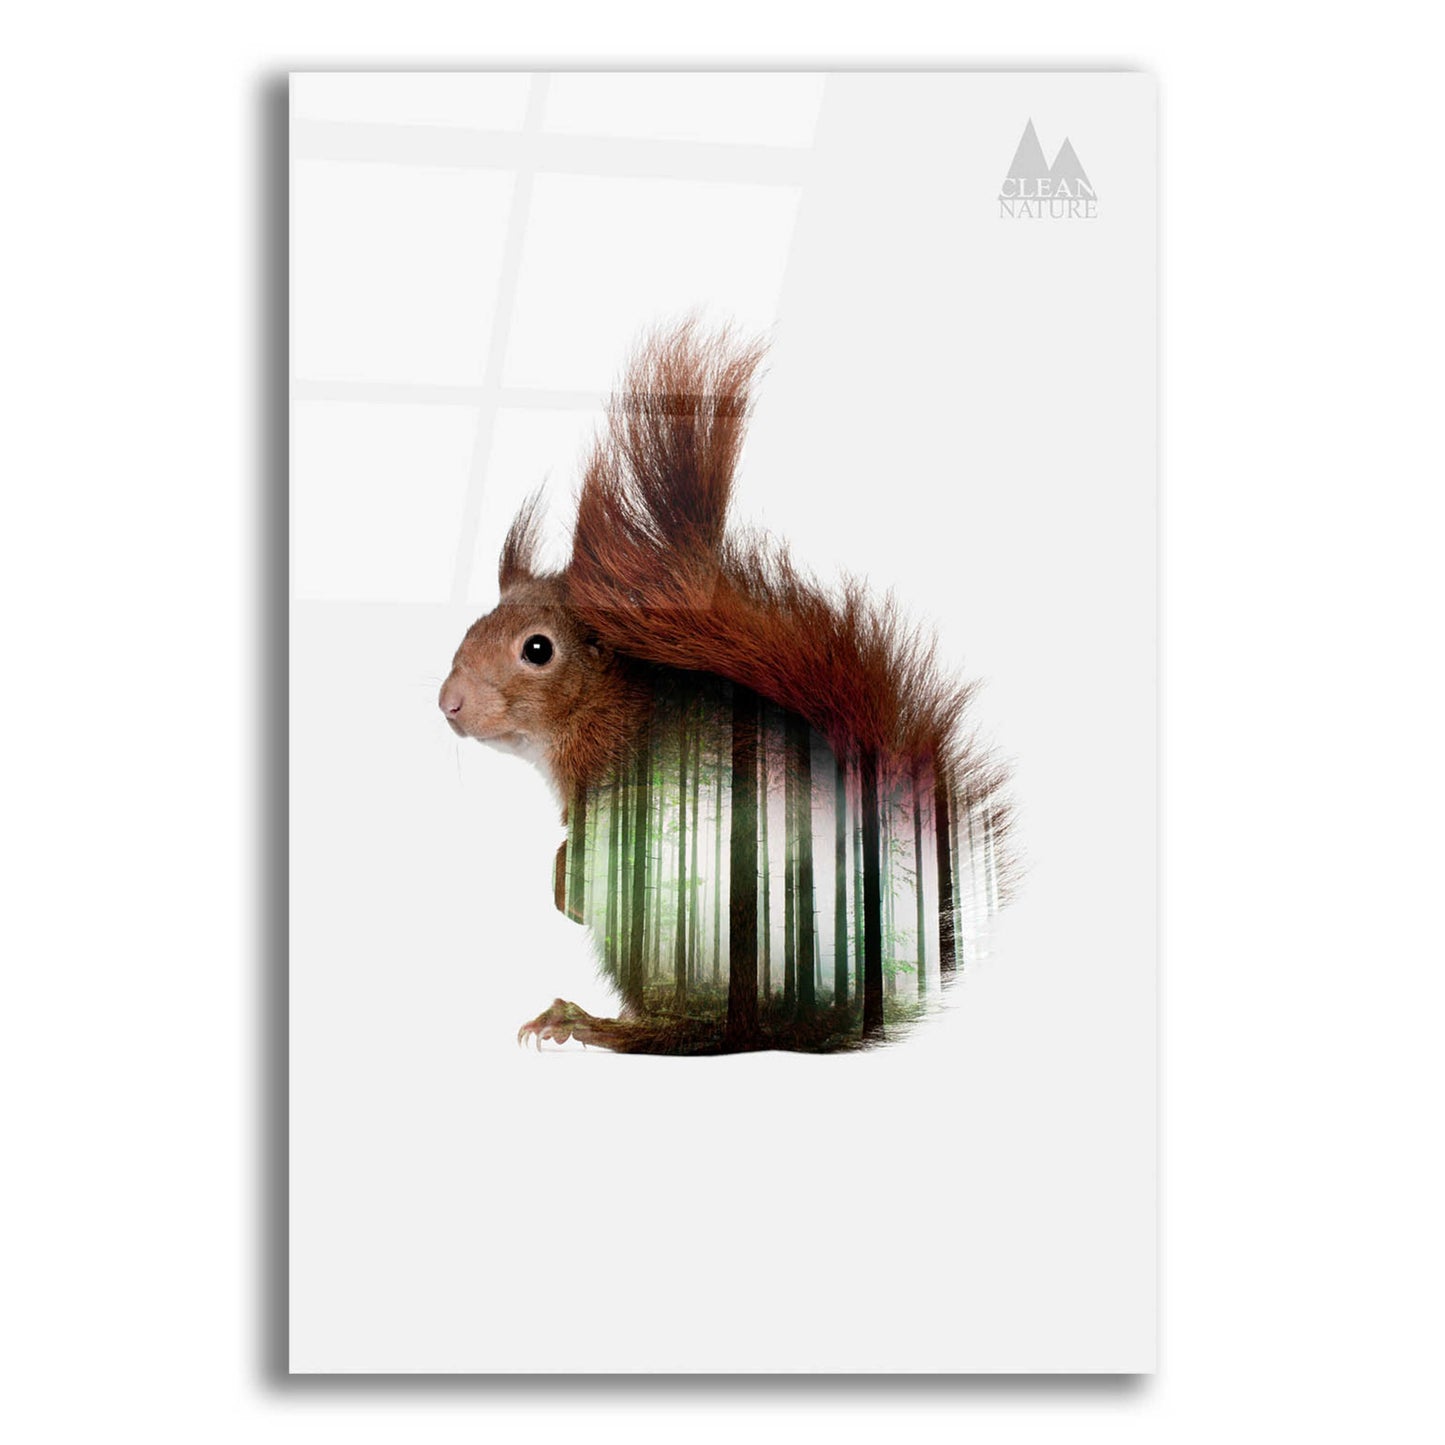 Epic Art 'Squirrel' by Clean Nature, Acrylic Glass Wall Art,12x16